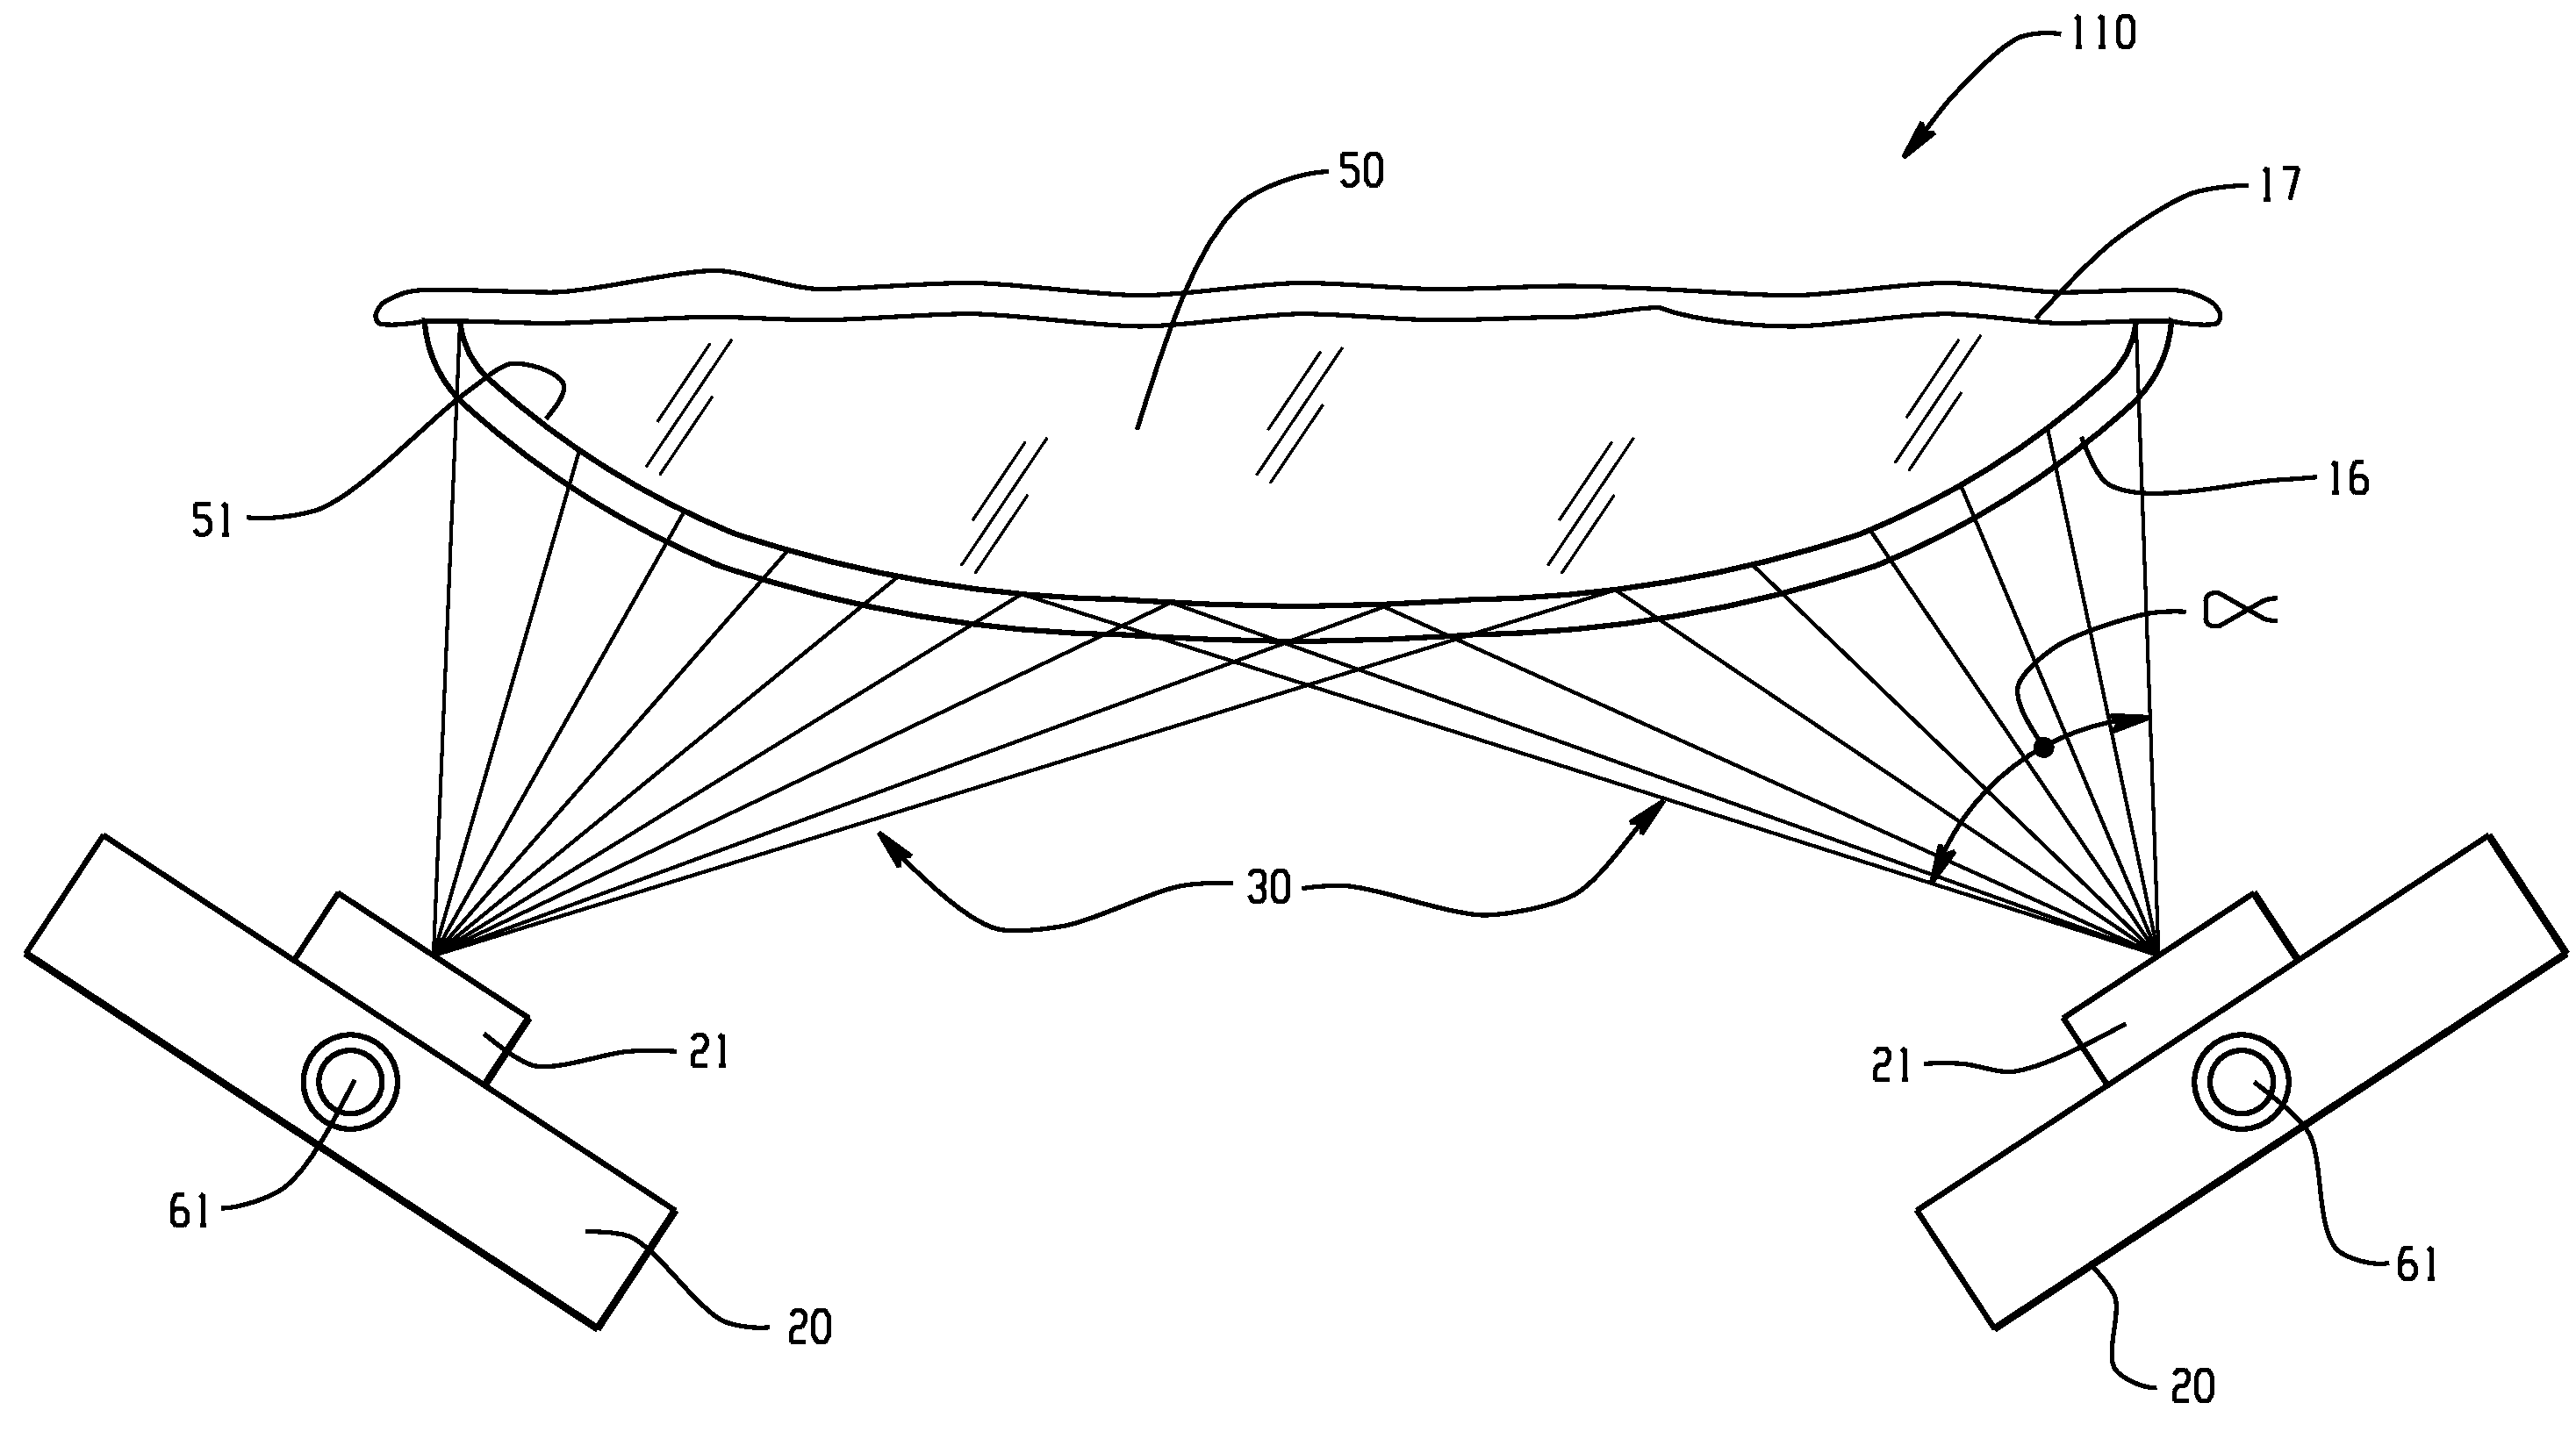 Narrowband de-icing and ice release system and method